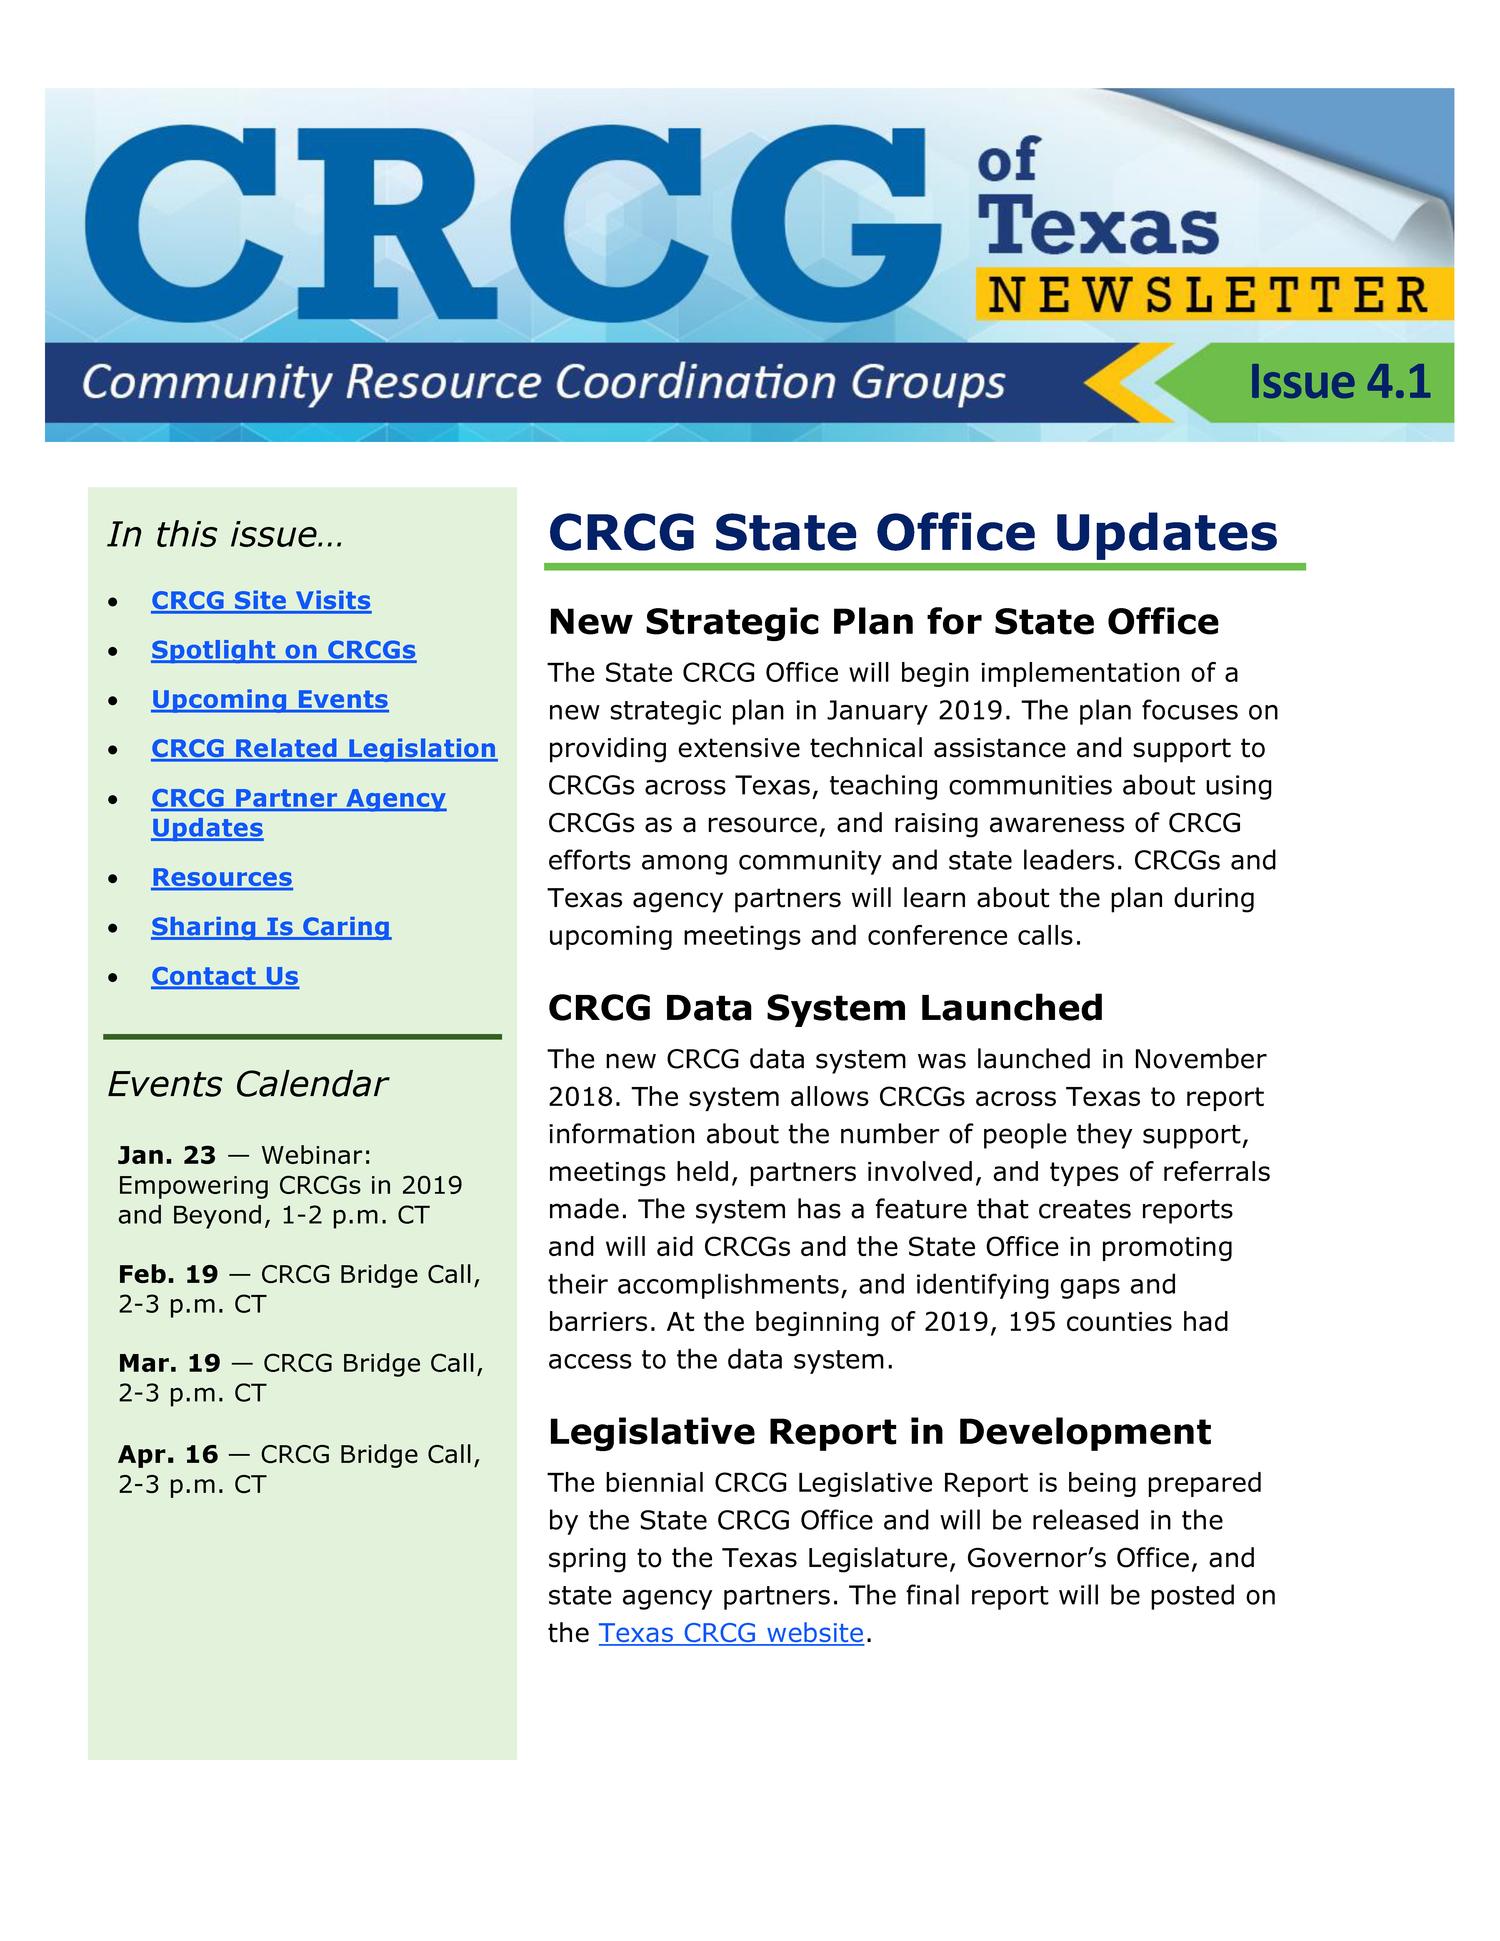 CRCG Newsletter, Number 4.1, January 2019
                                                
                                                    1
                                                